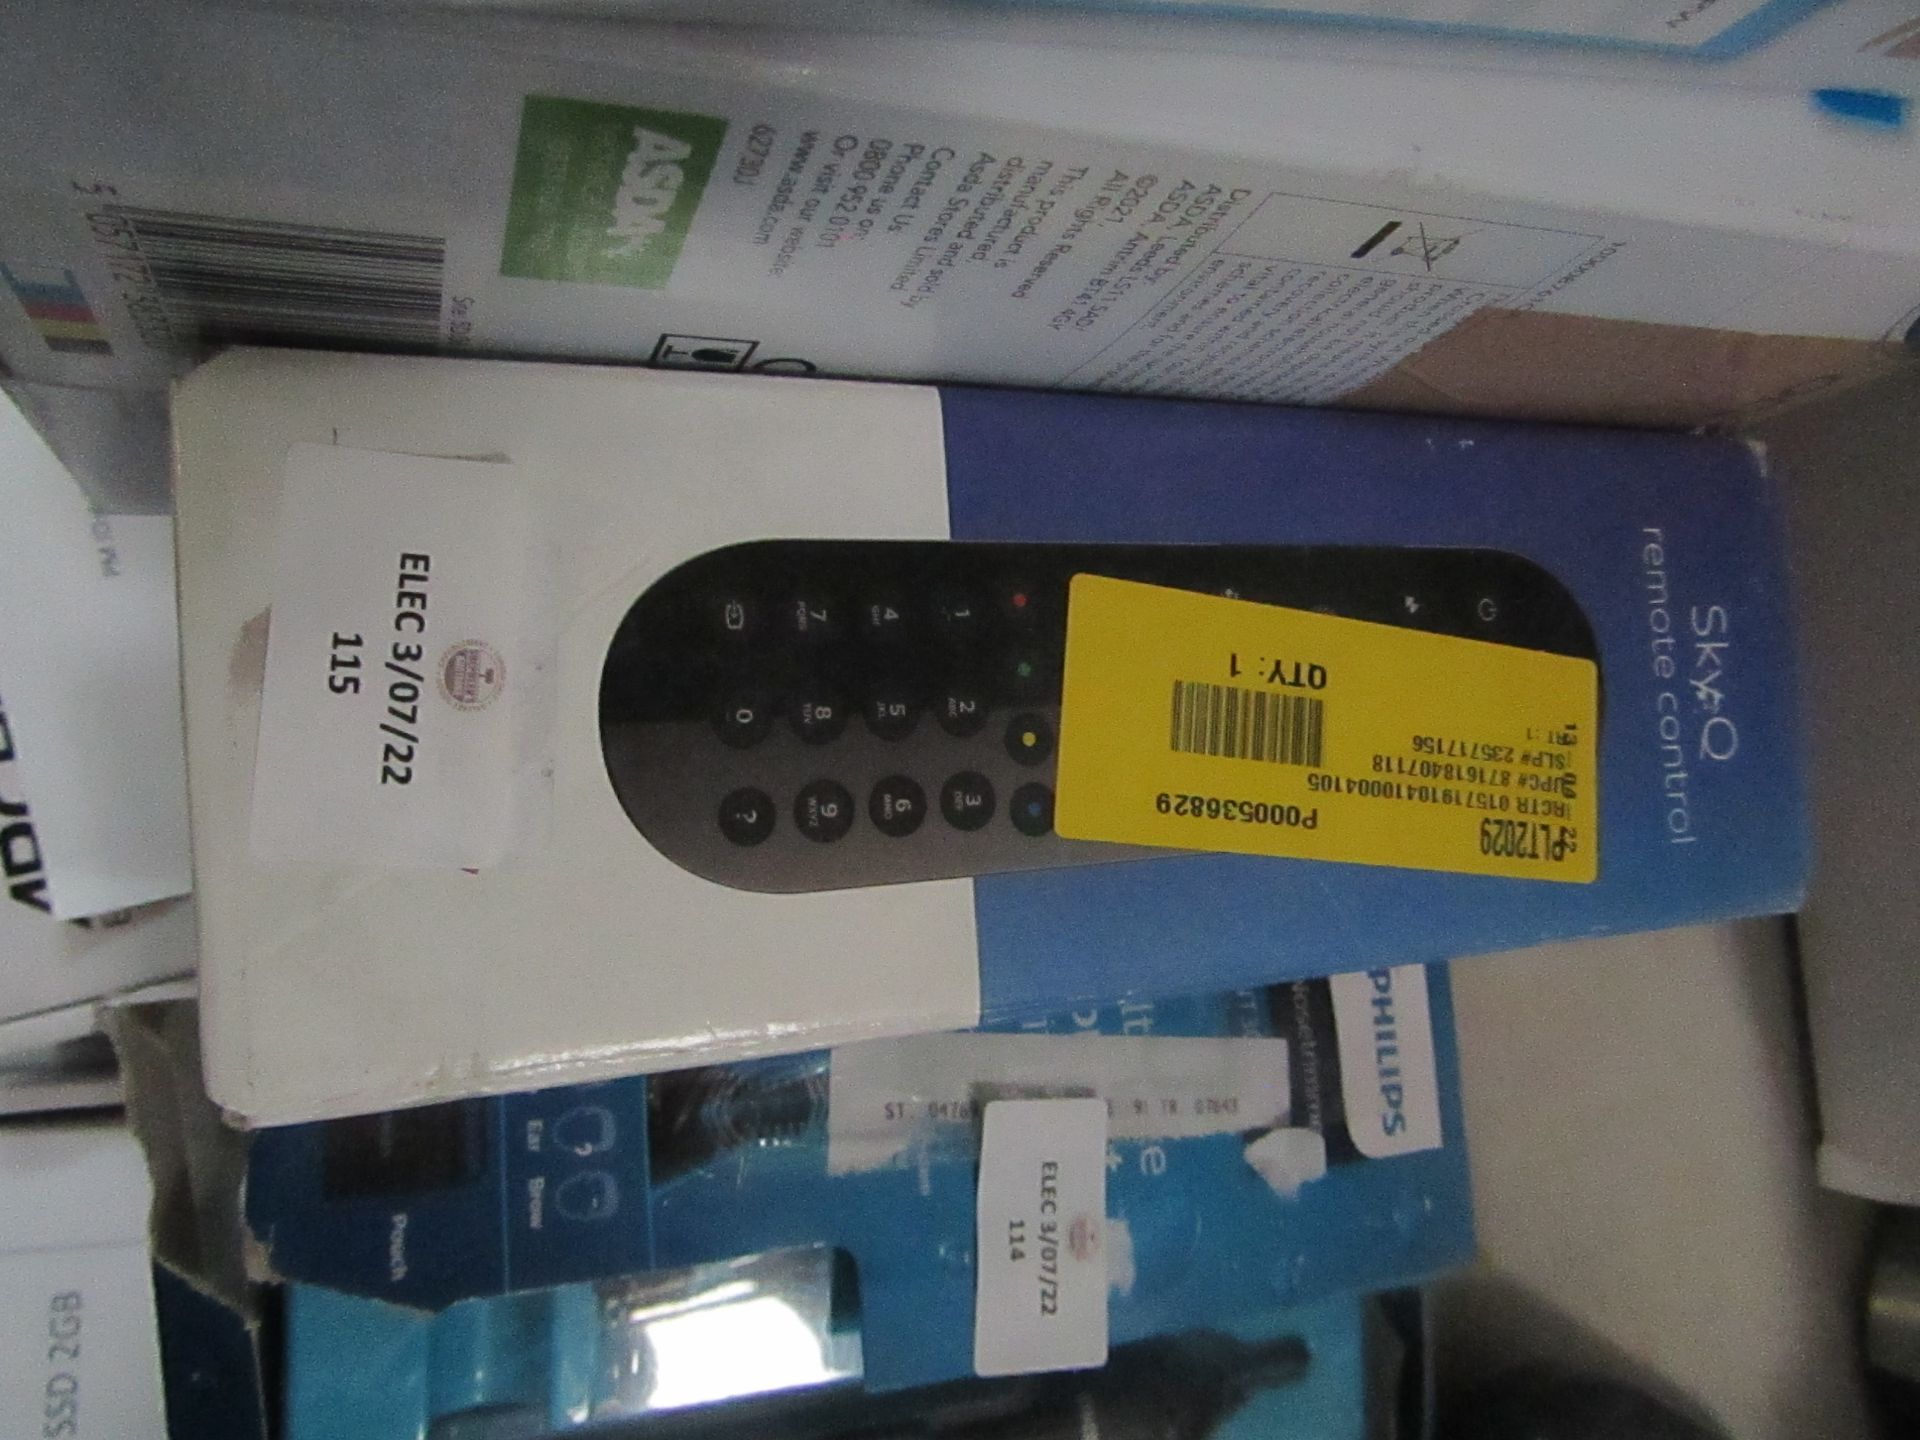 | 3X |SKY Q REPLACEMENT REMOTE CONTROLS BOXED AND UNCHECKED RETURN | LOAD REF ASF-DIR-029 |